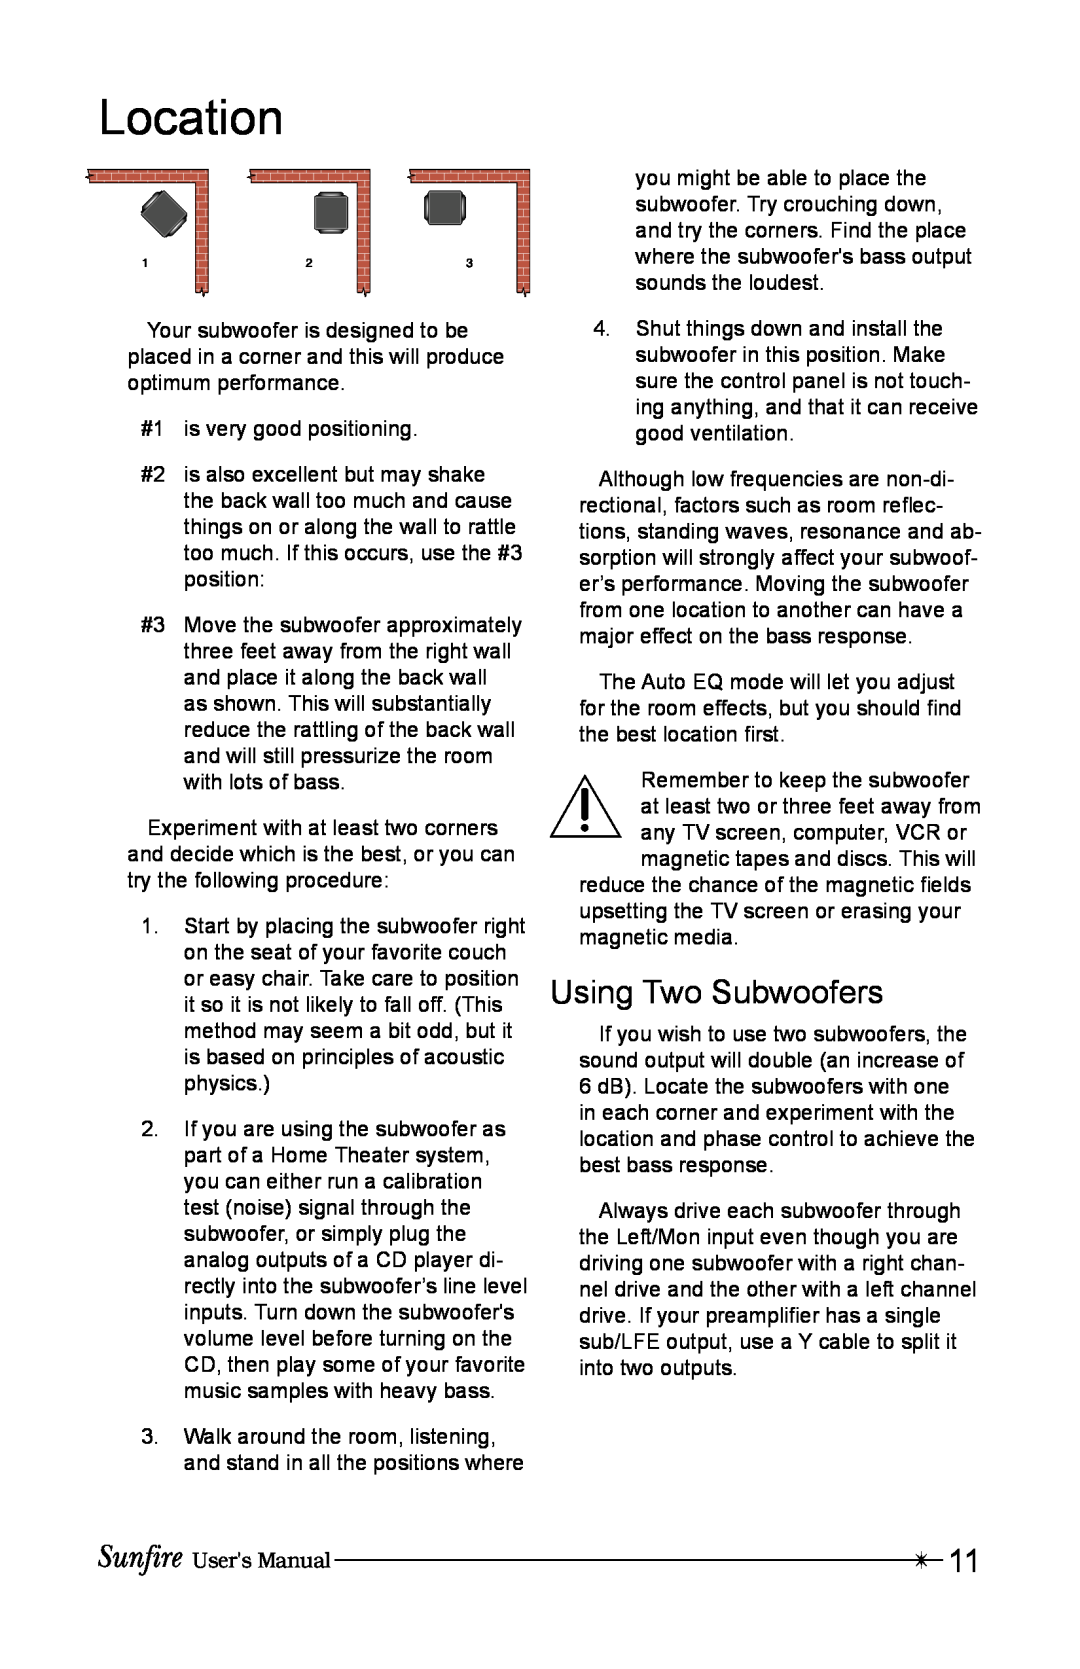 Sunfire True Subwoofer Signature and Standard Version user manual Location, Using Two Subwoofers 